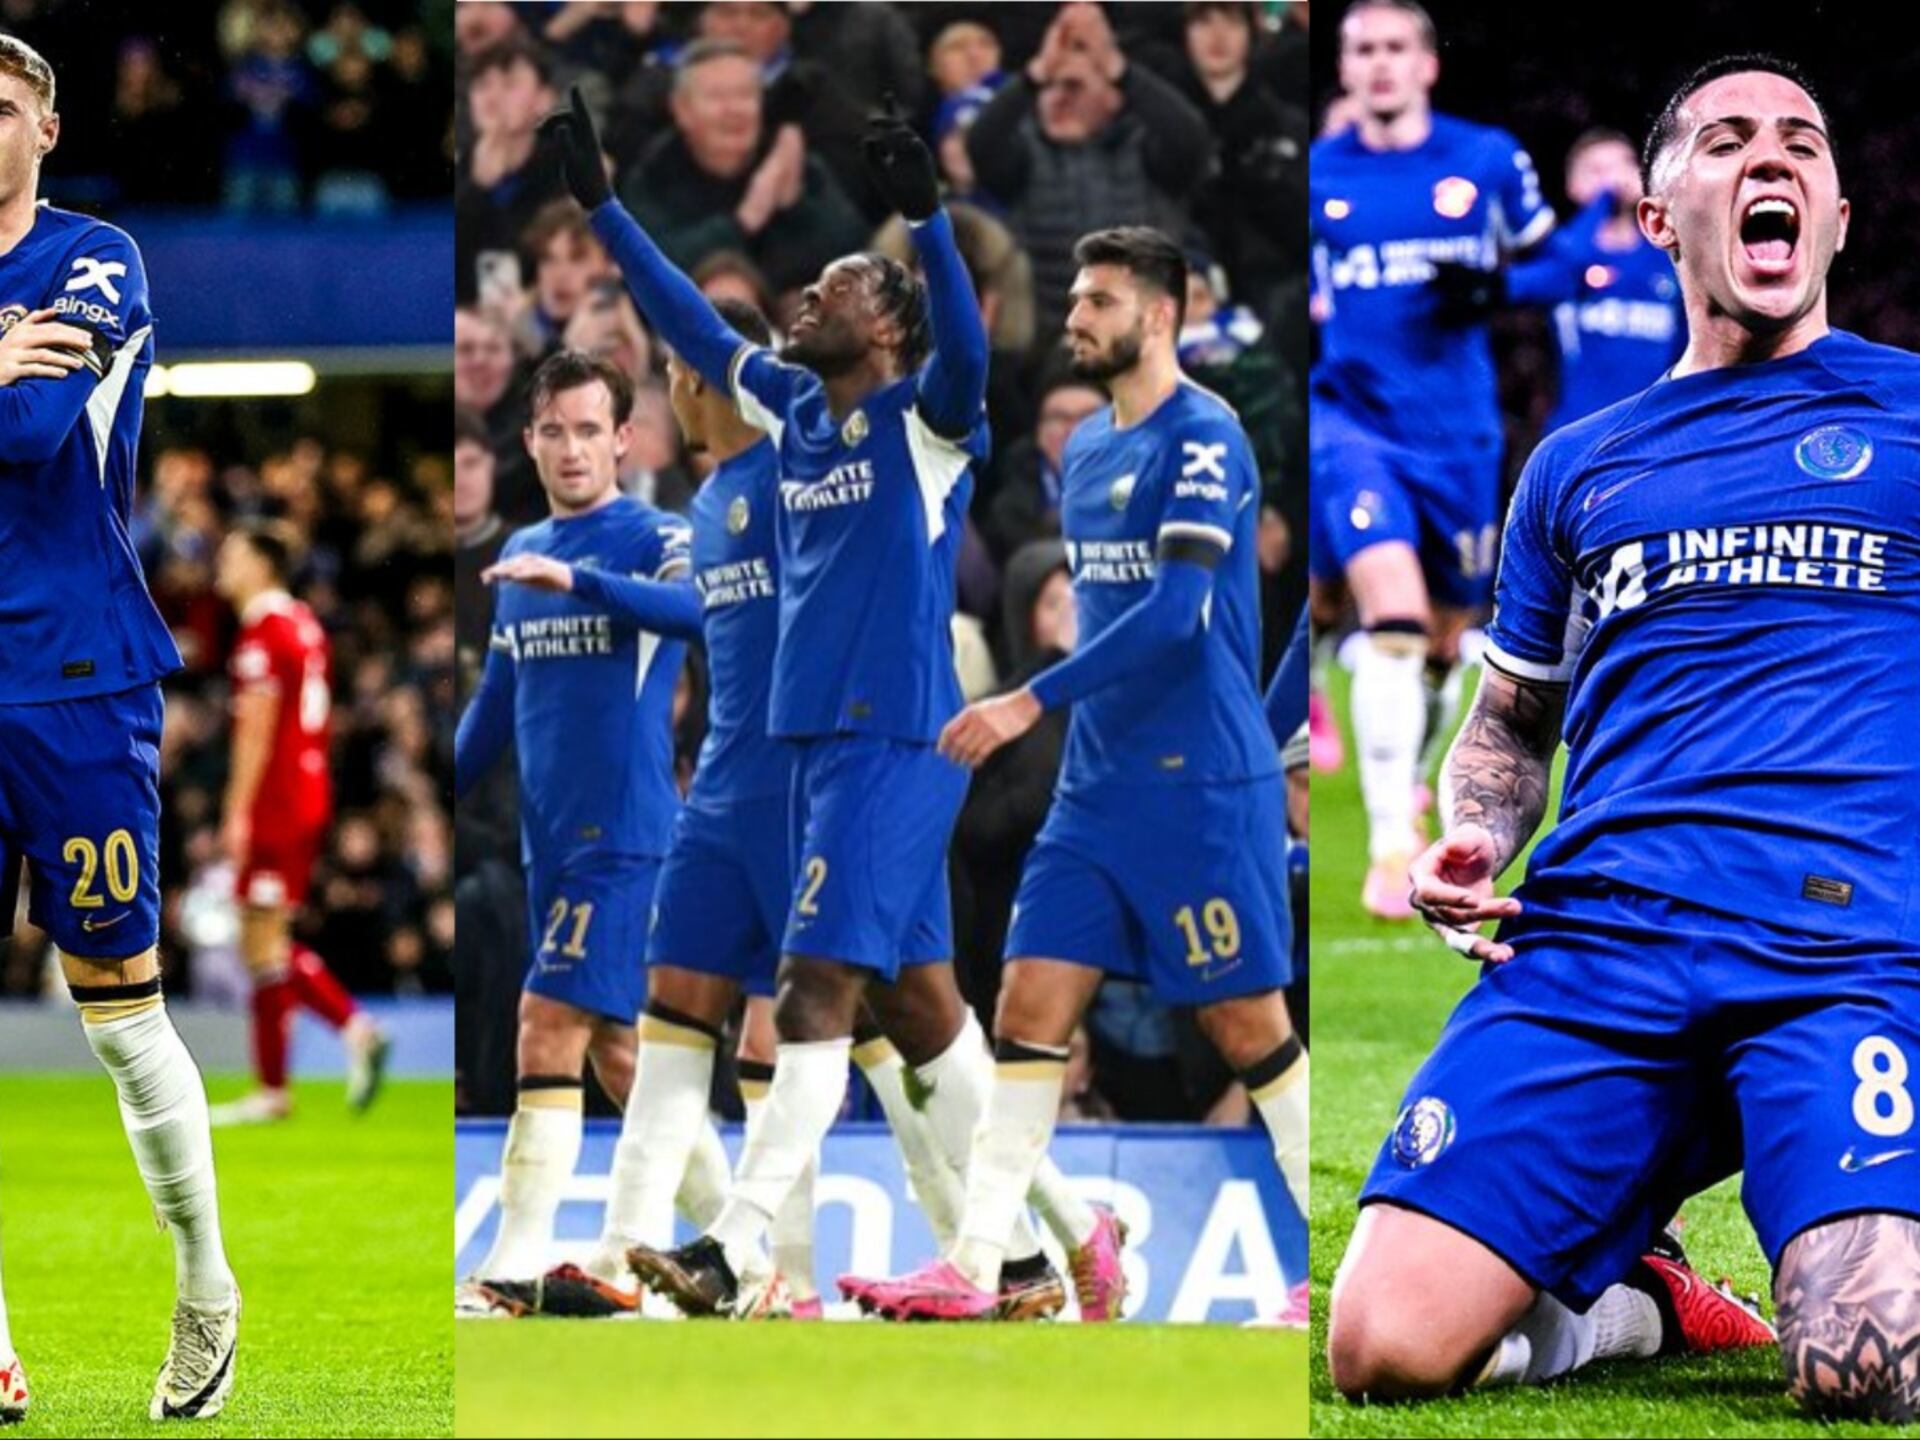 Chelsea FC advances to the EFL Cup final after destroying Middlesbrough